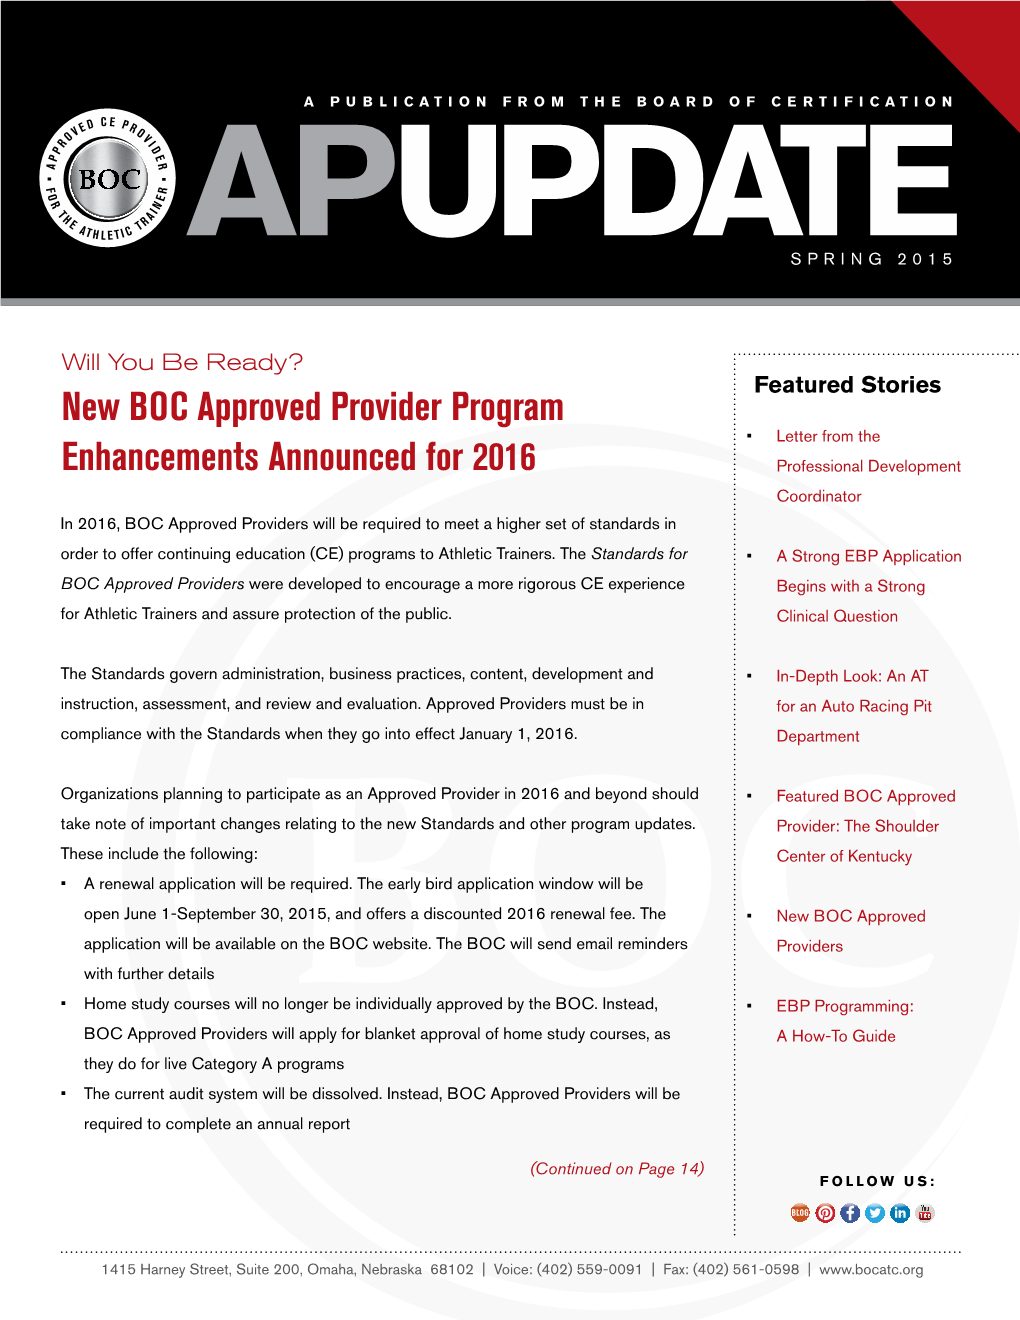 New BOC Approved Provider Program Enhancements Announced for 2016